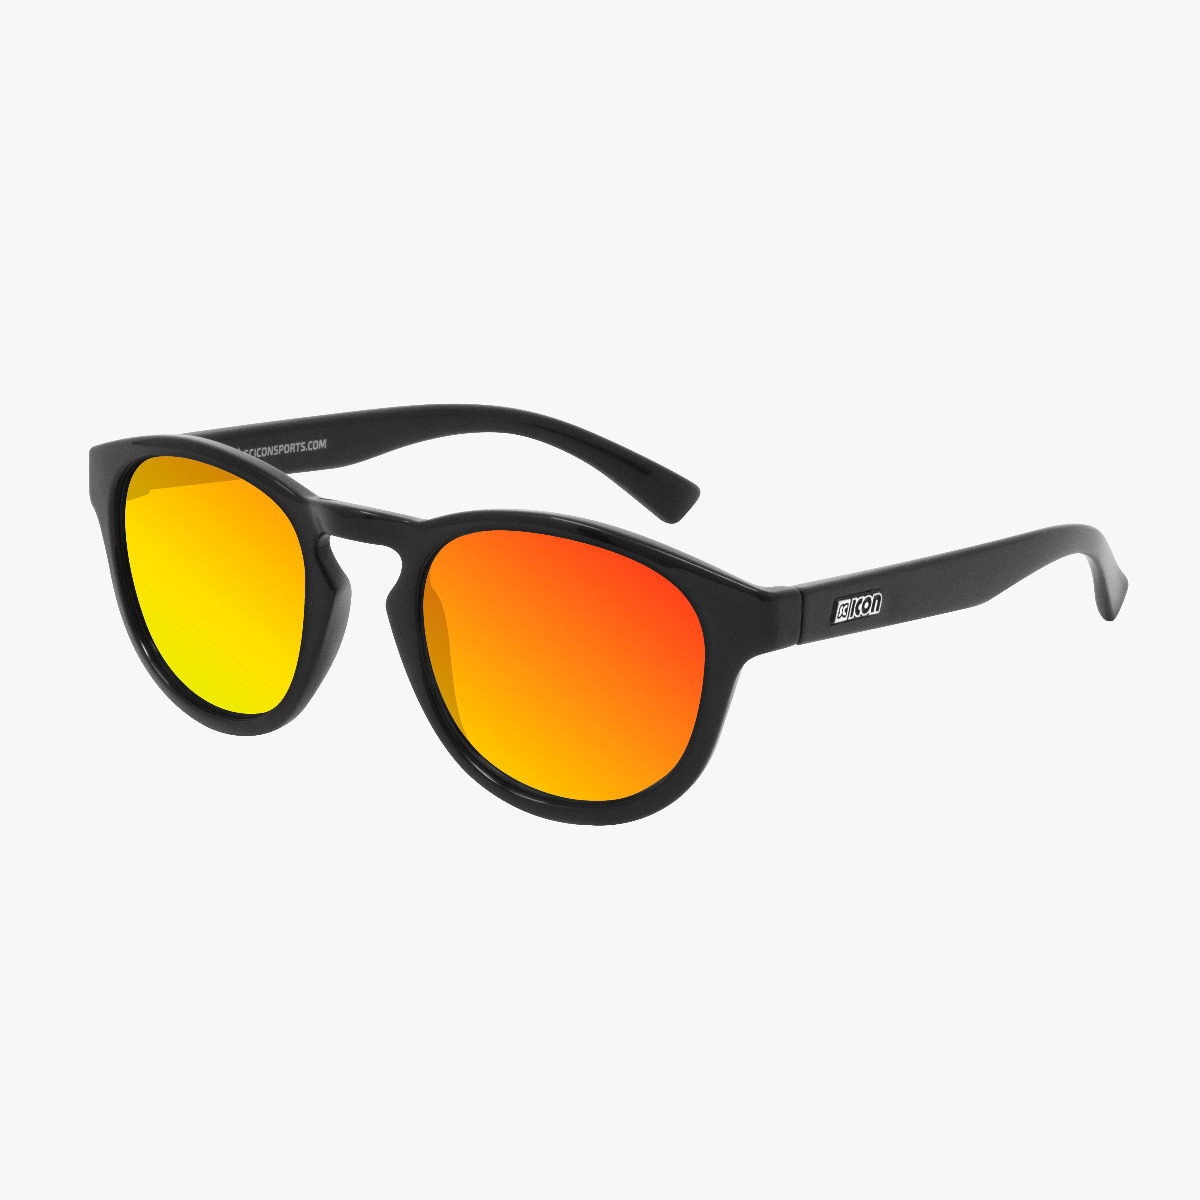 Buy Oakley Corridor Turquoise Glasses Red Lens l At The Best Price